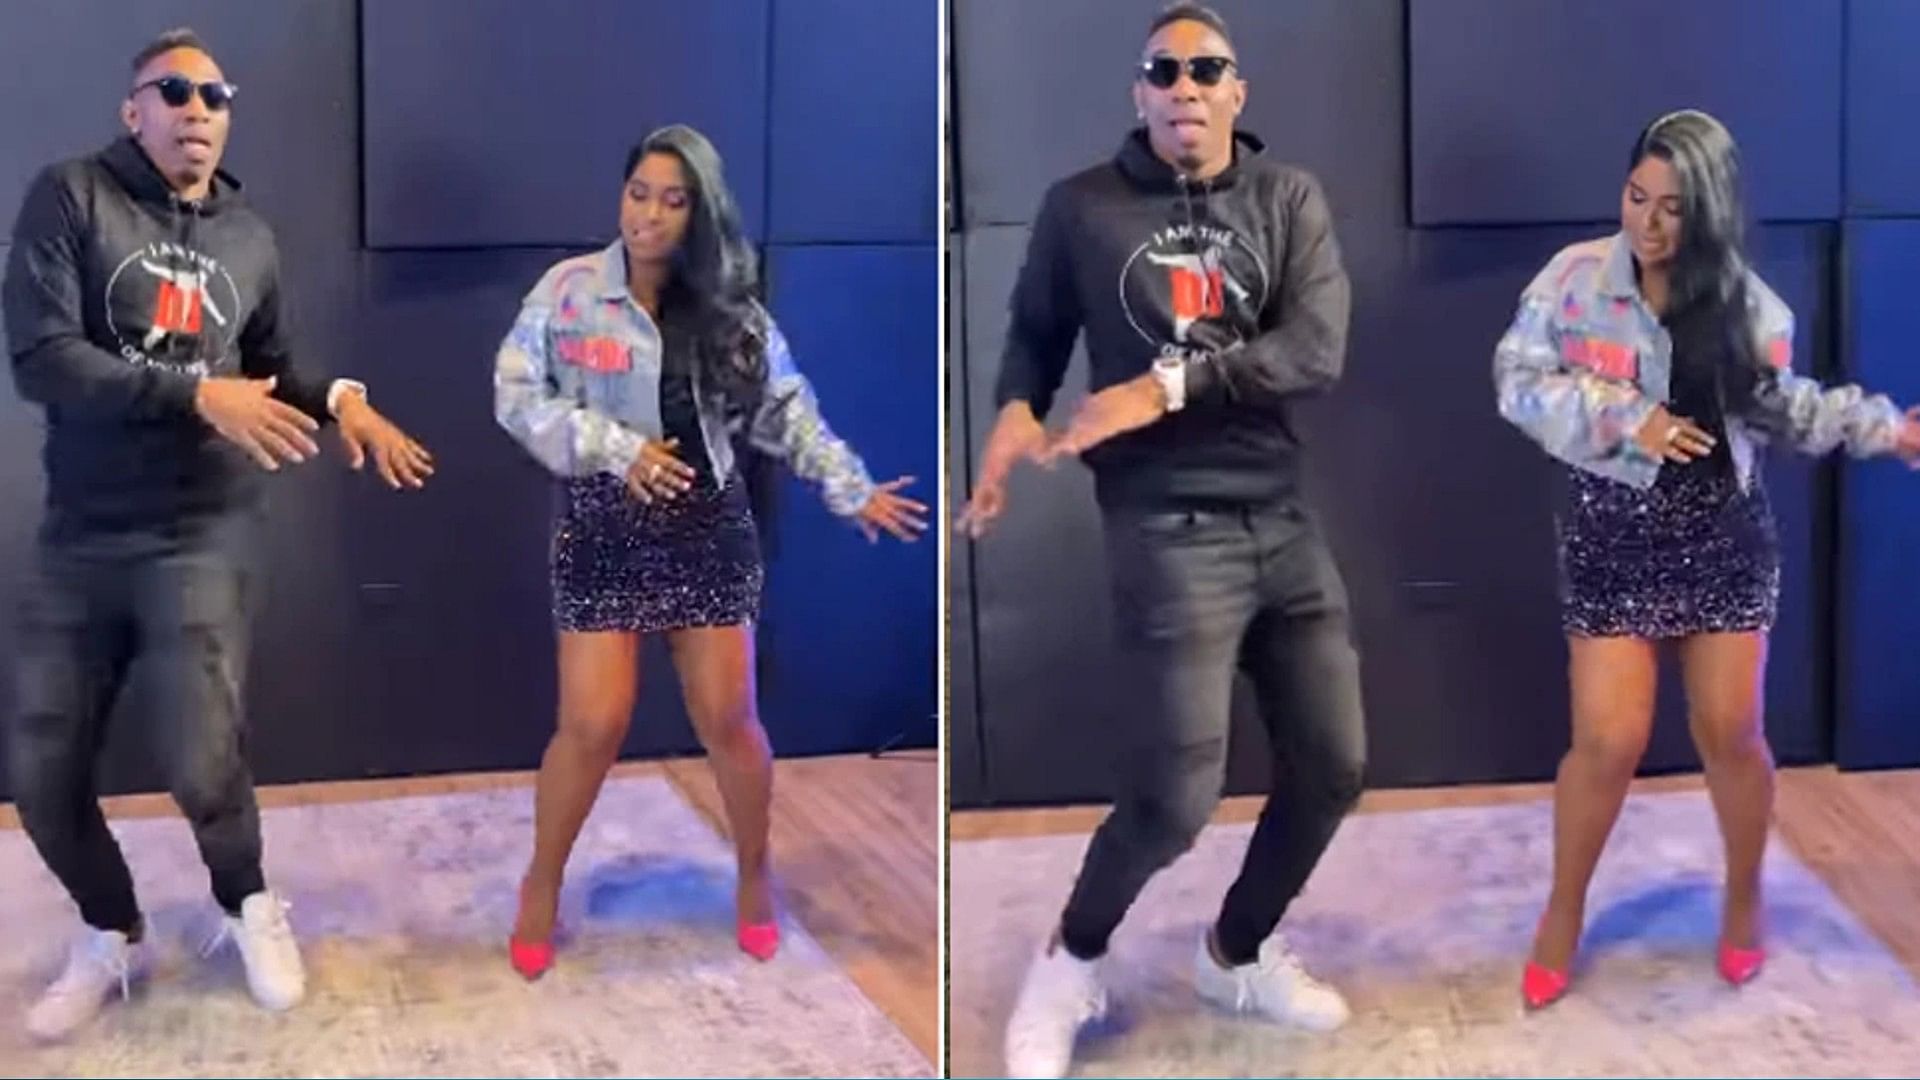 Cricketer Dwayne Bravo danced with a girl on Nach Meri Rani song video goes viral